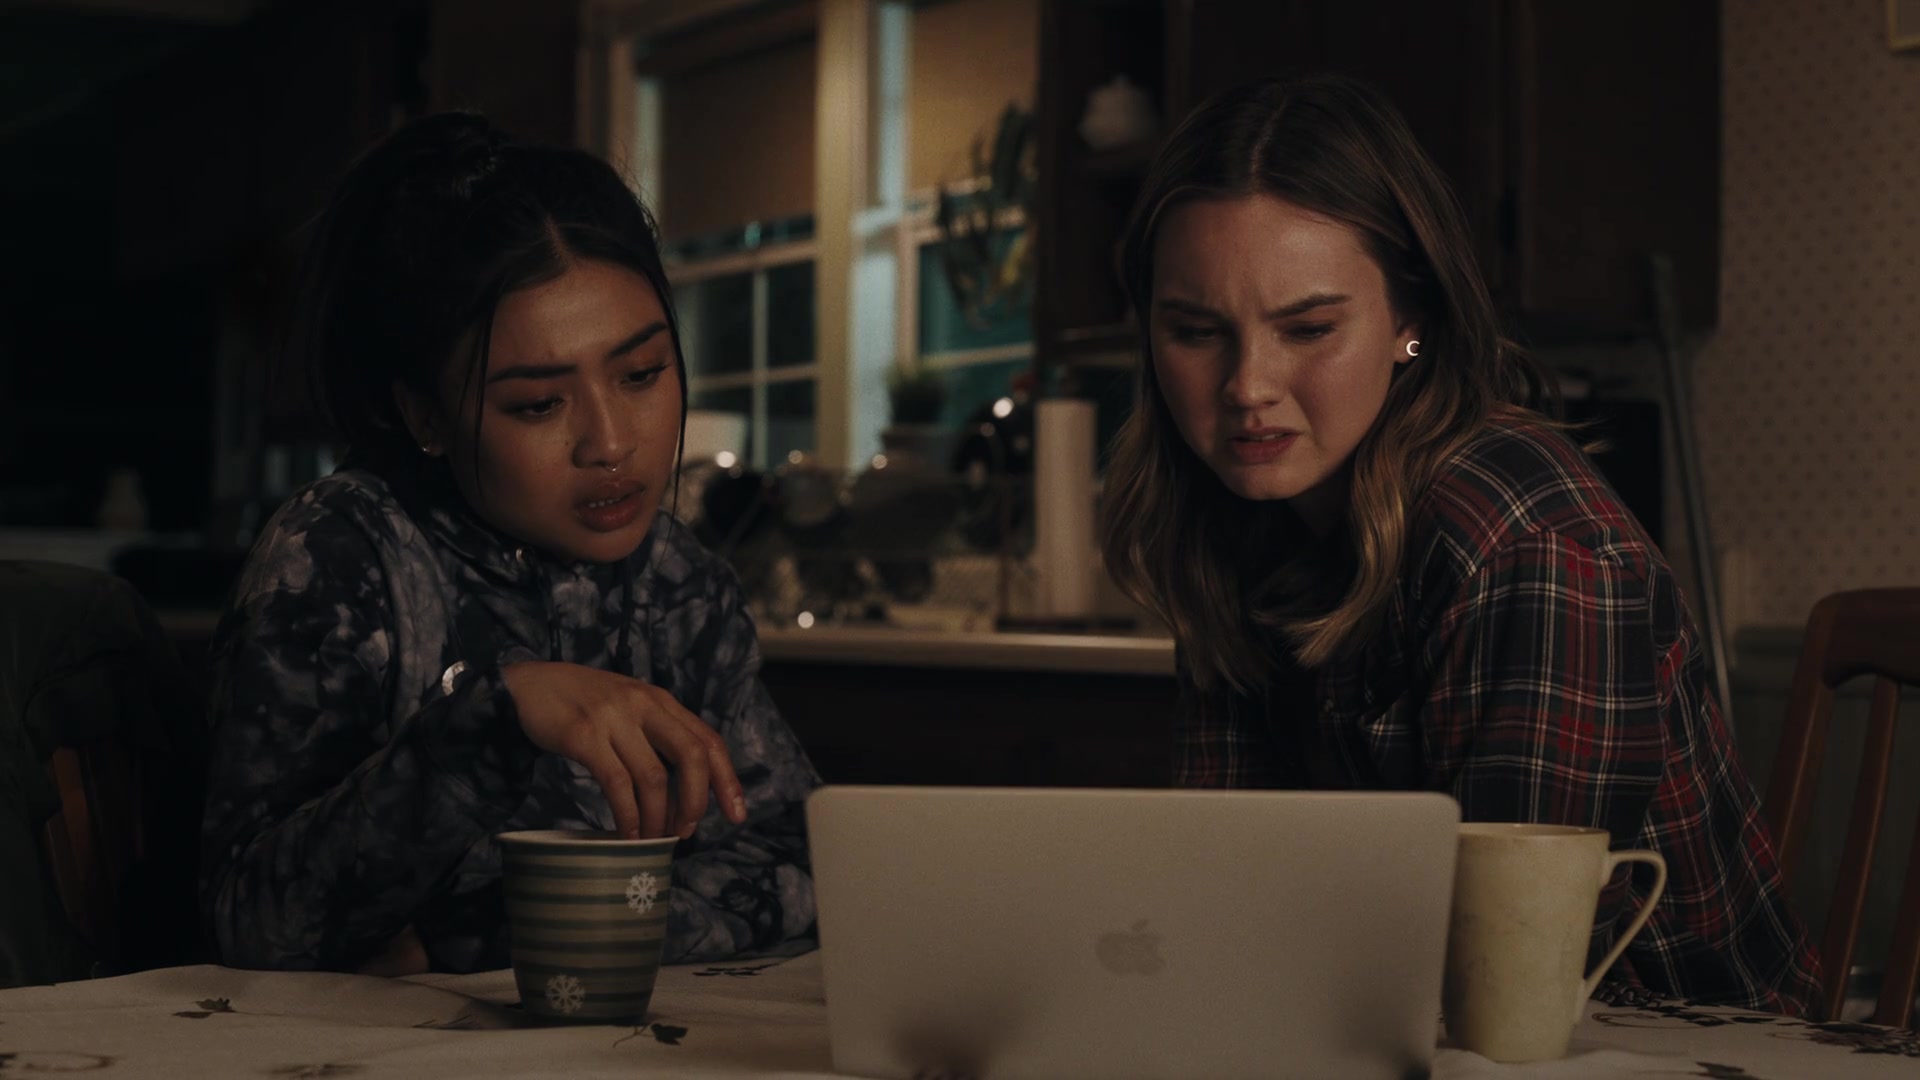 Apple MacBook Laptop Used By Brianne Tju &amp; Liana Liberato In Light As A  Feather - Season 2, Episode 5, &quot;... Silent As The Night&quot; (2019)